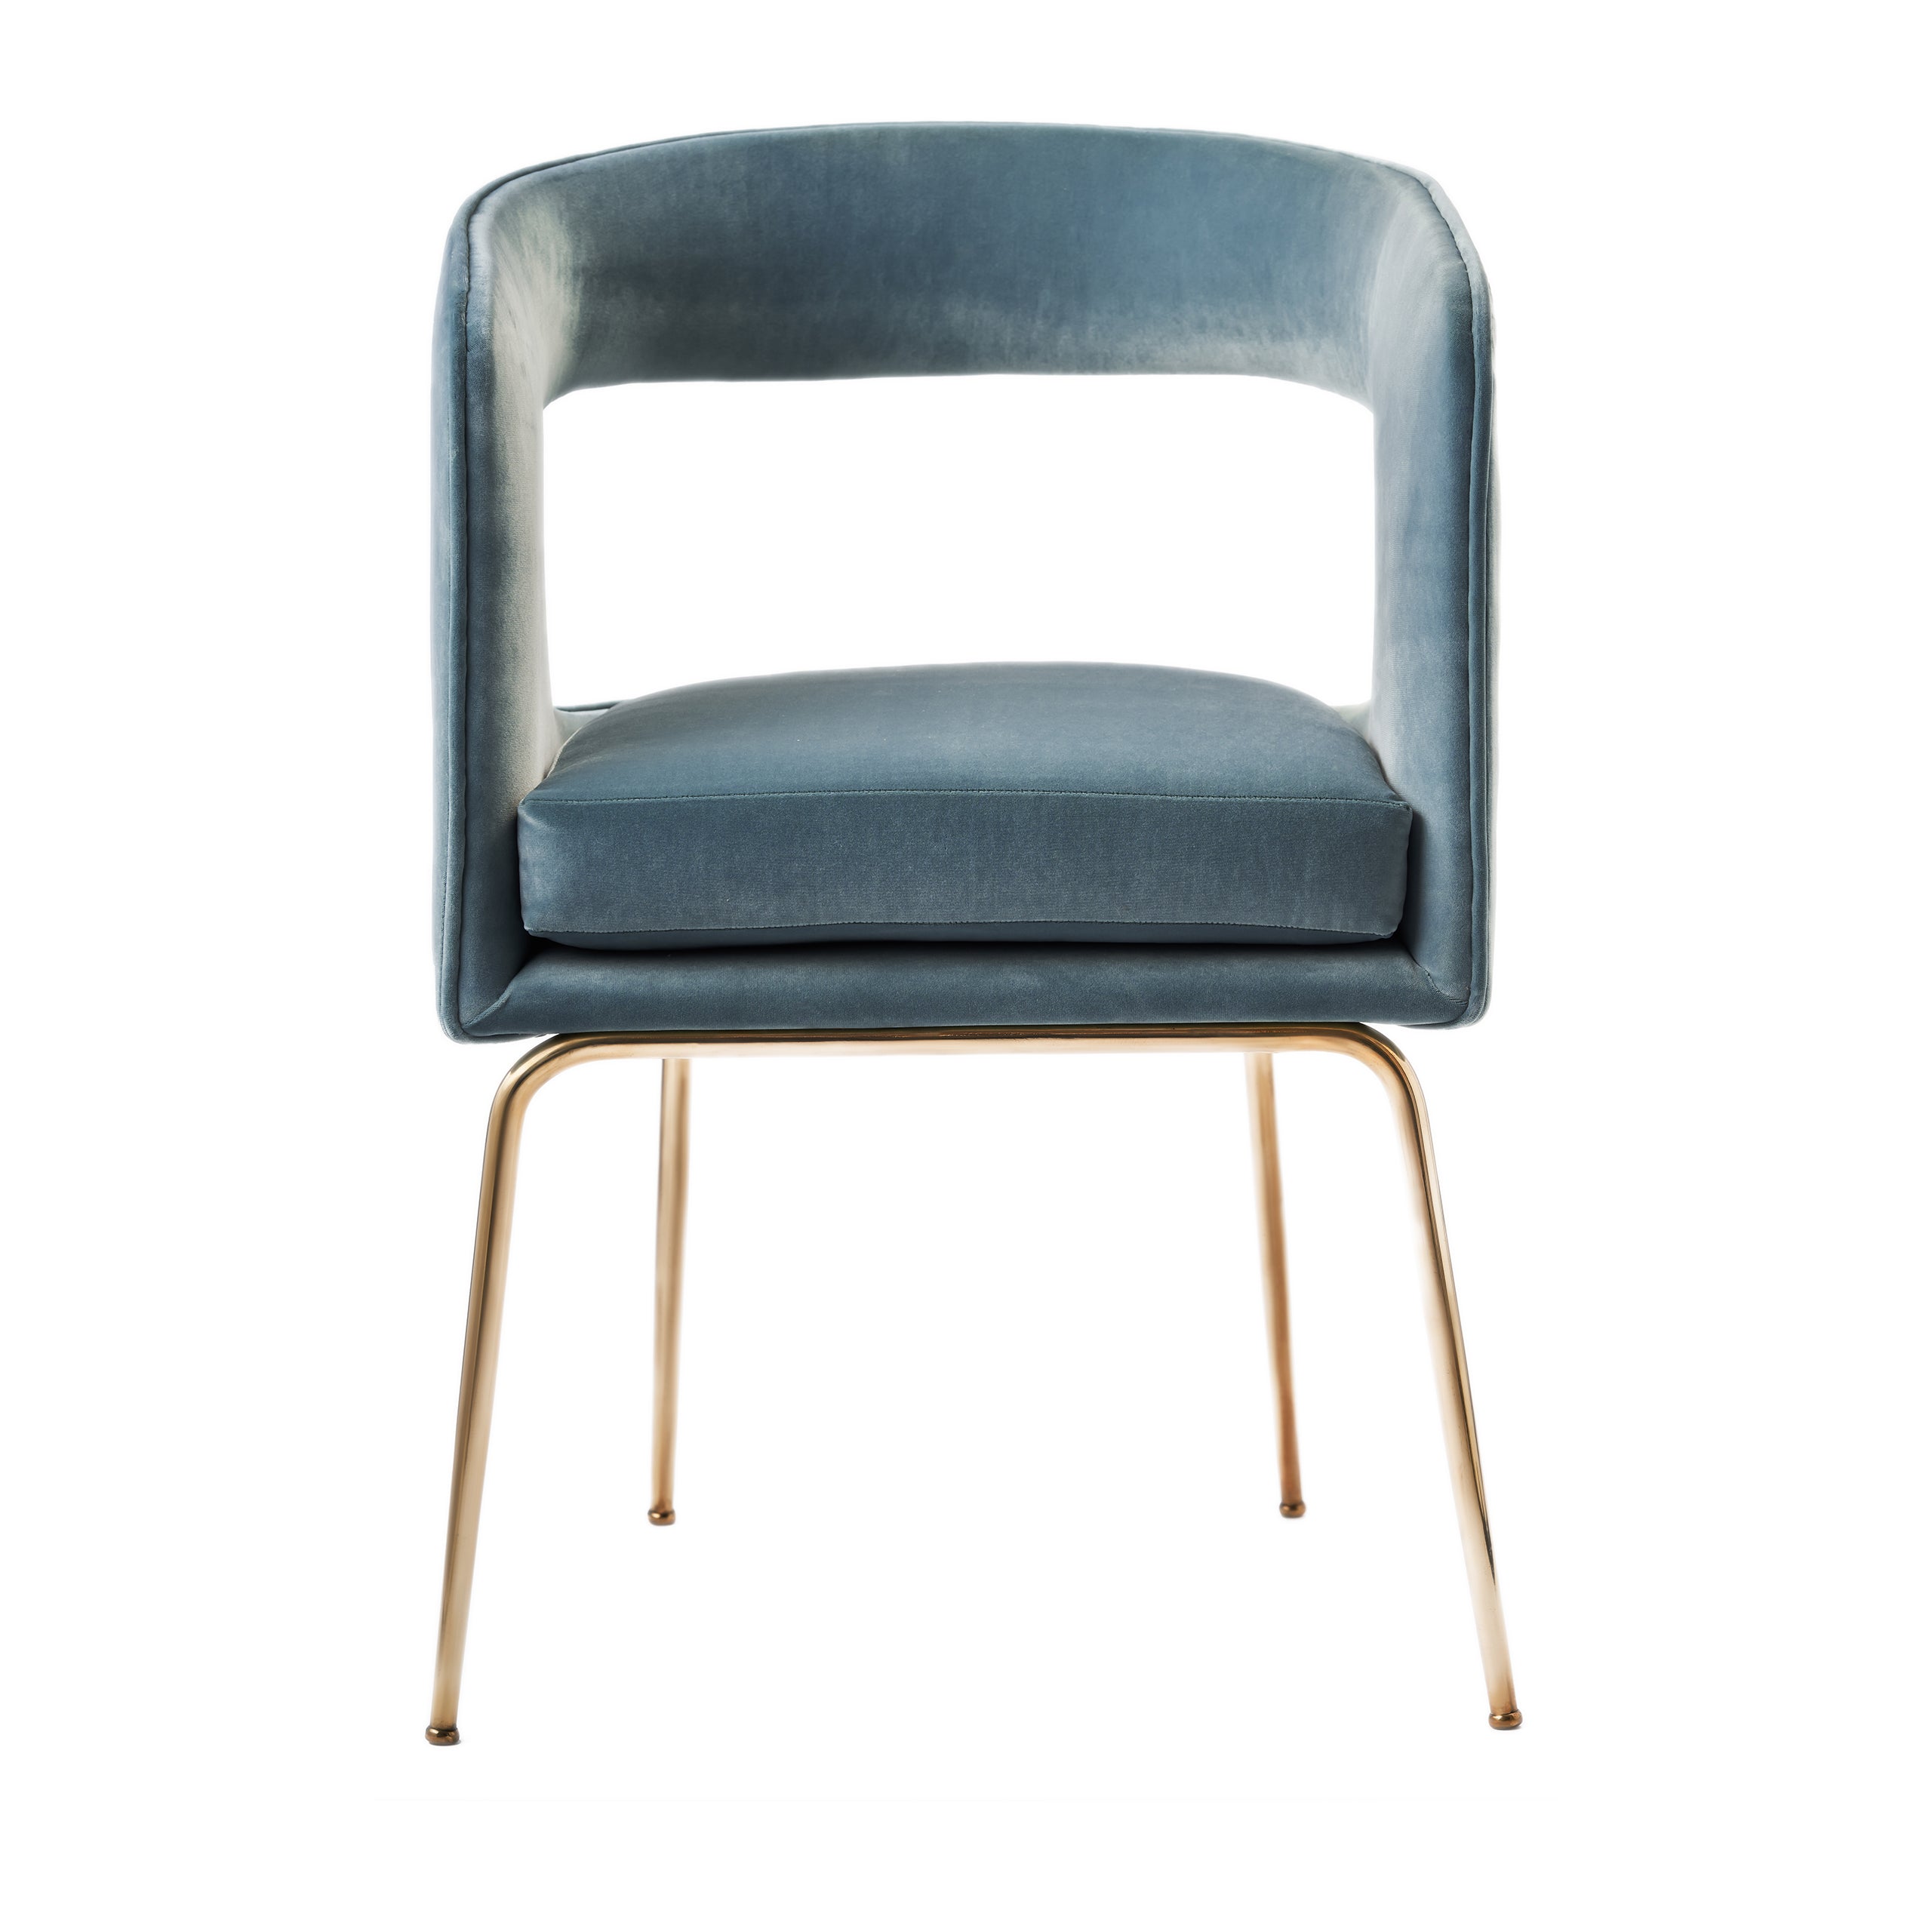 Steel Dining Chair - MAISON KA- The Mob Collective